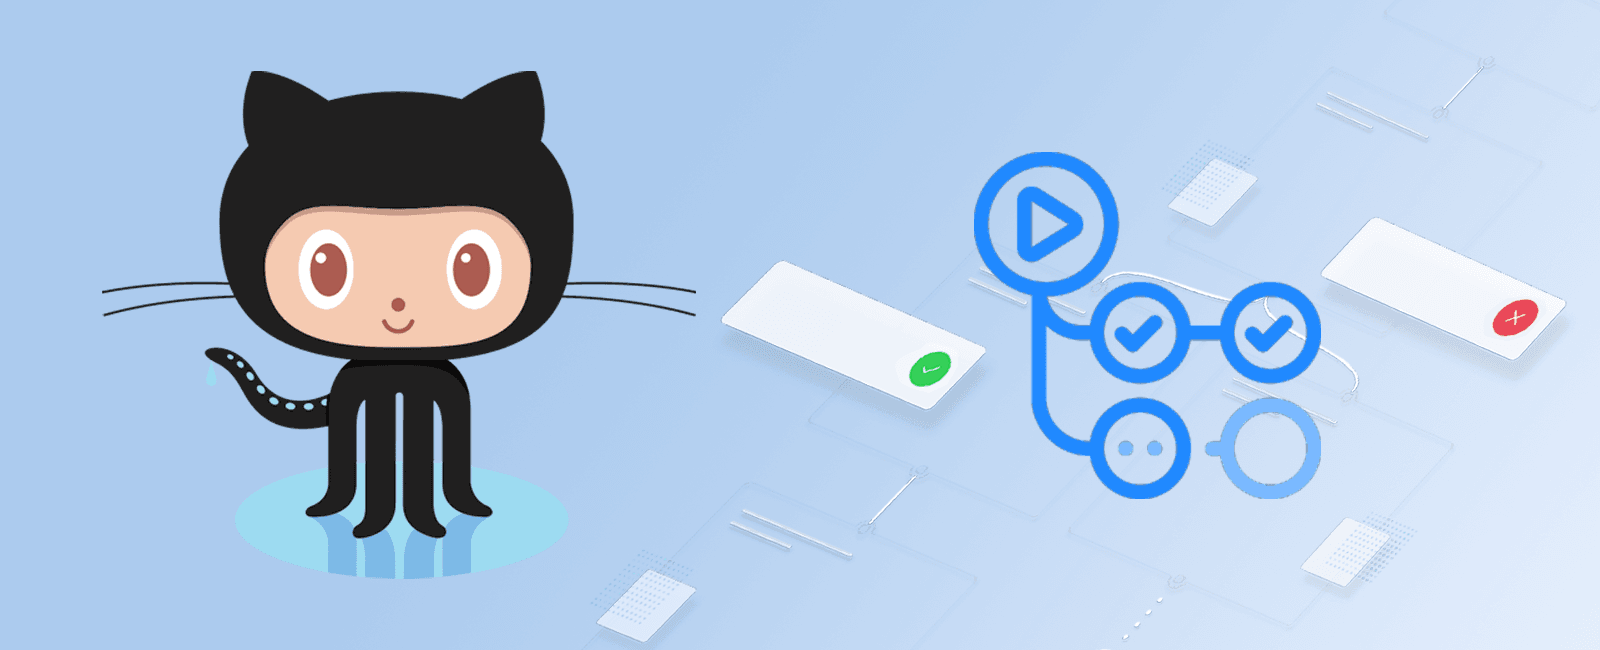 Automate your workflows using github actions